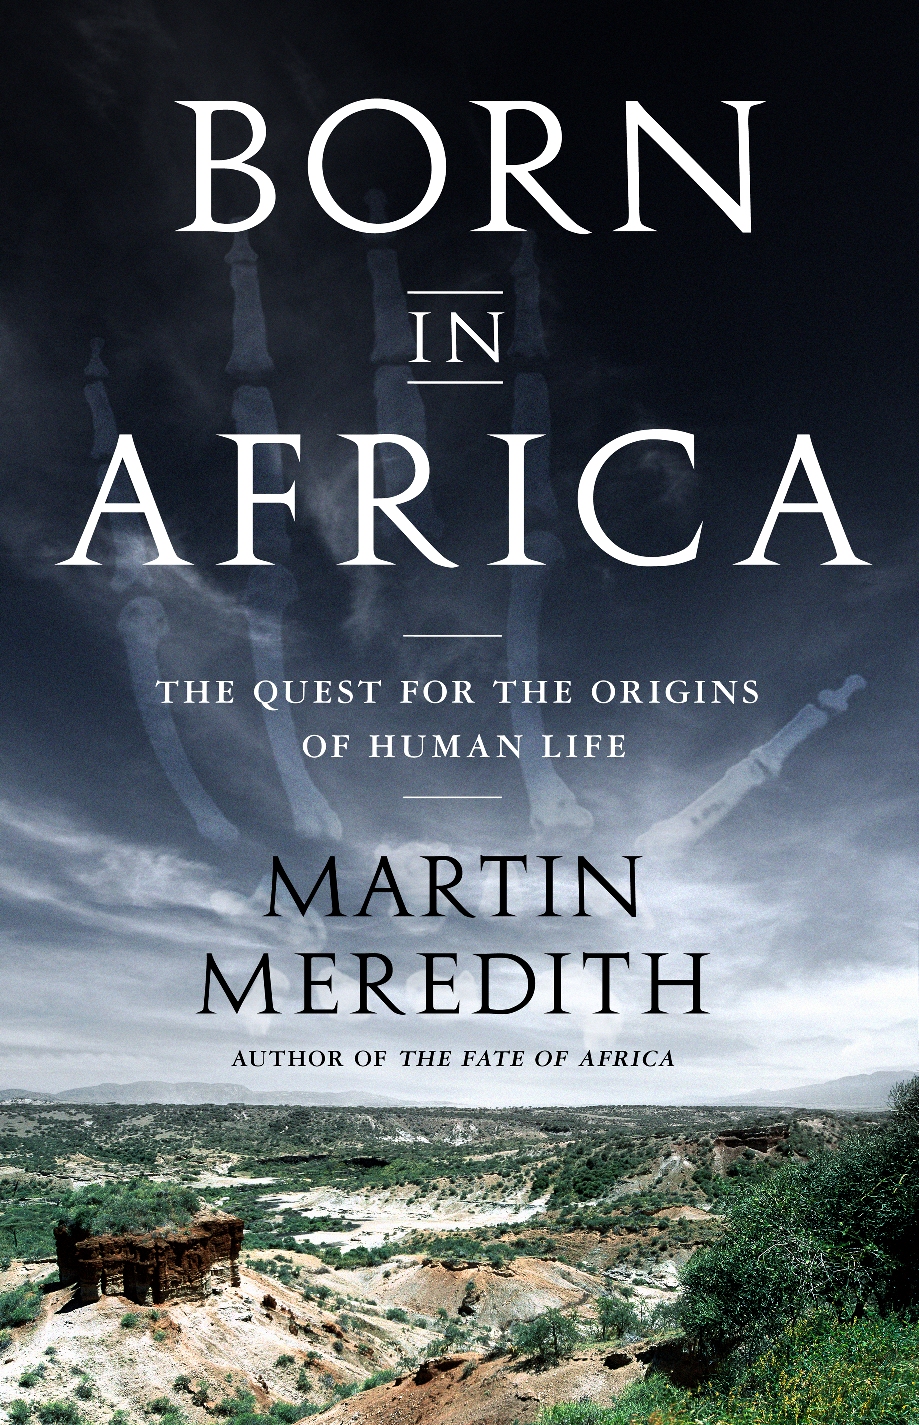 Martin　Book　Born　Hachette　Meredith　by　Africa　in　Group